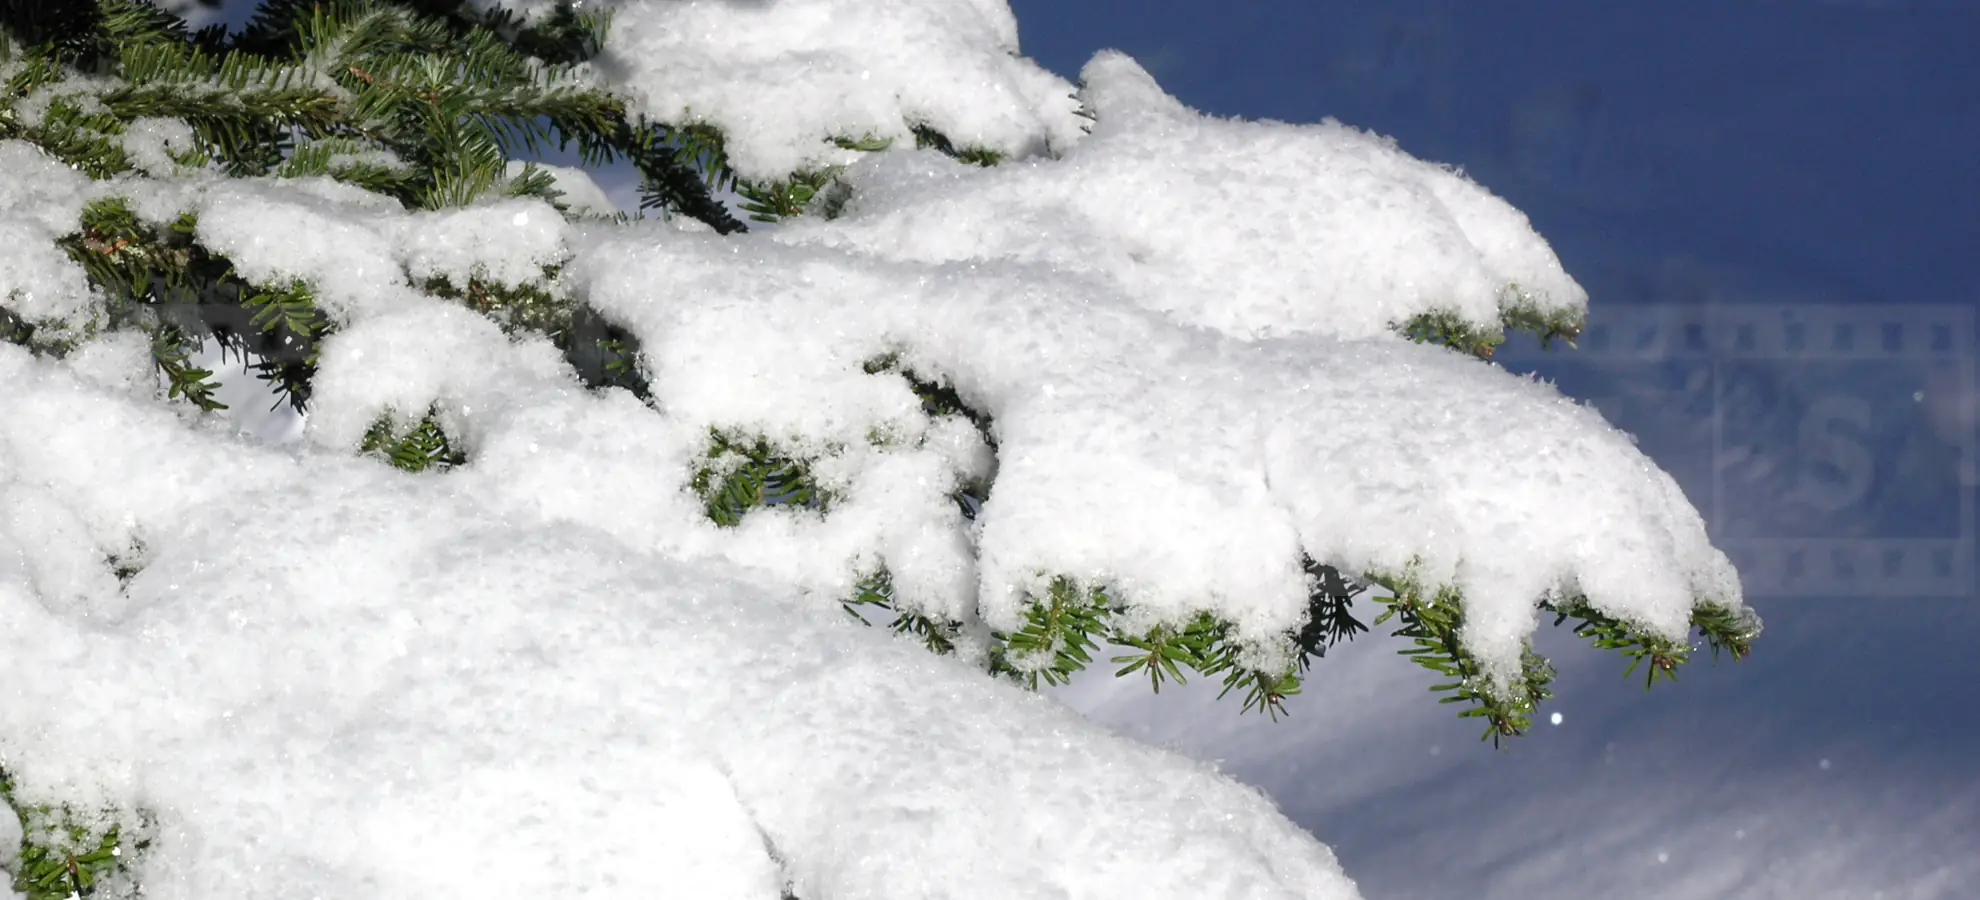 Evergreen tree with fresh snow in Canada